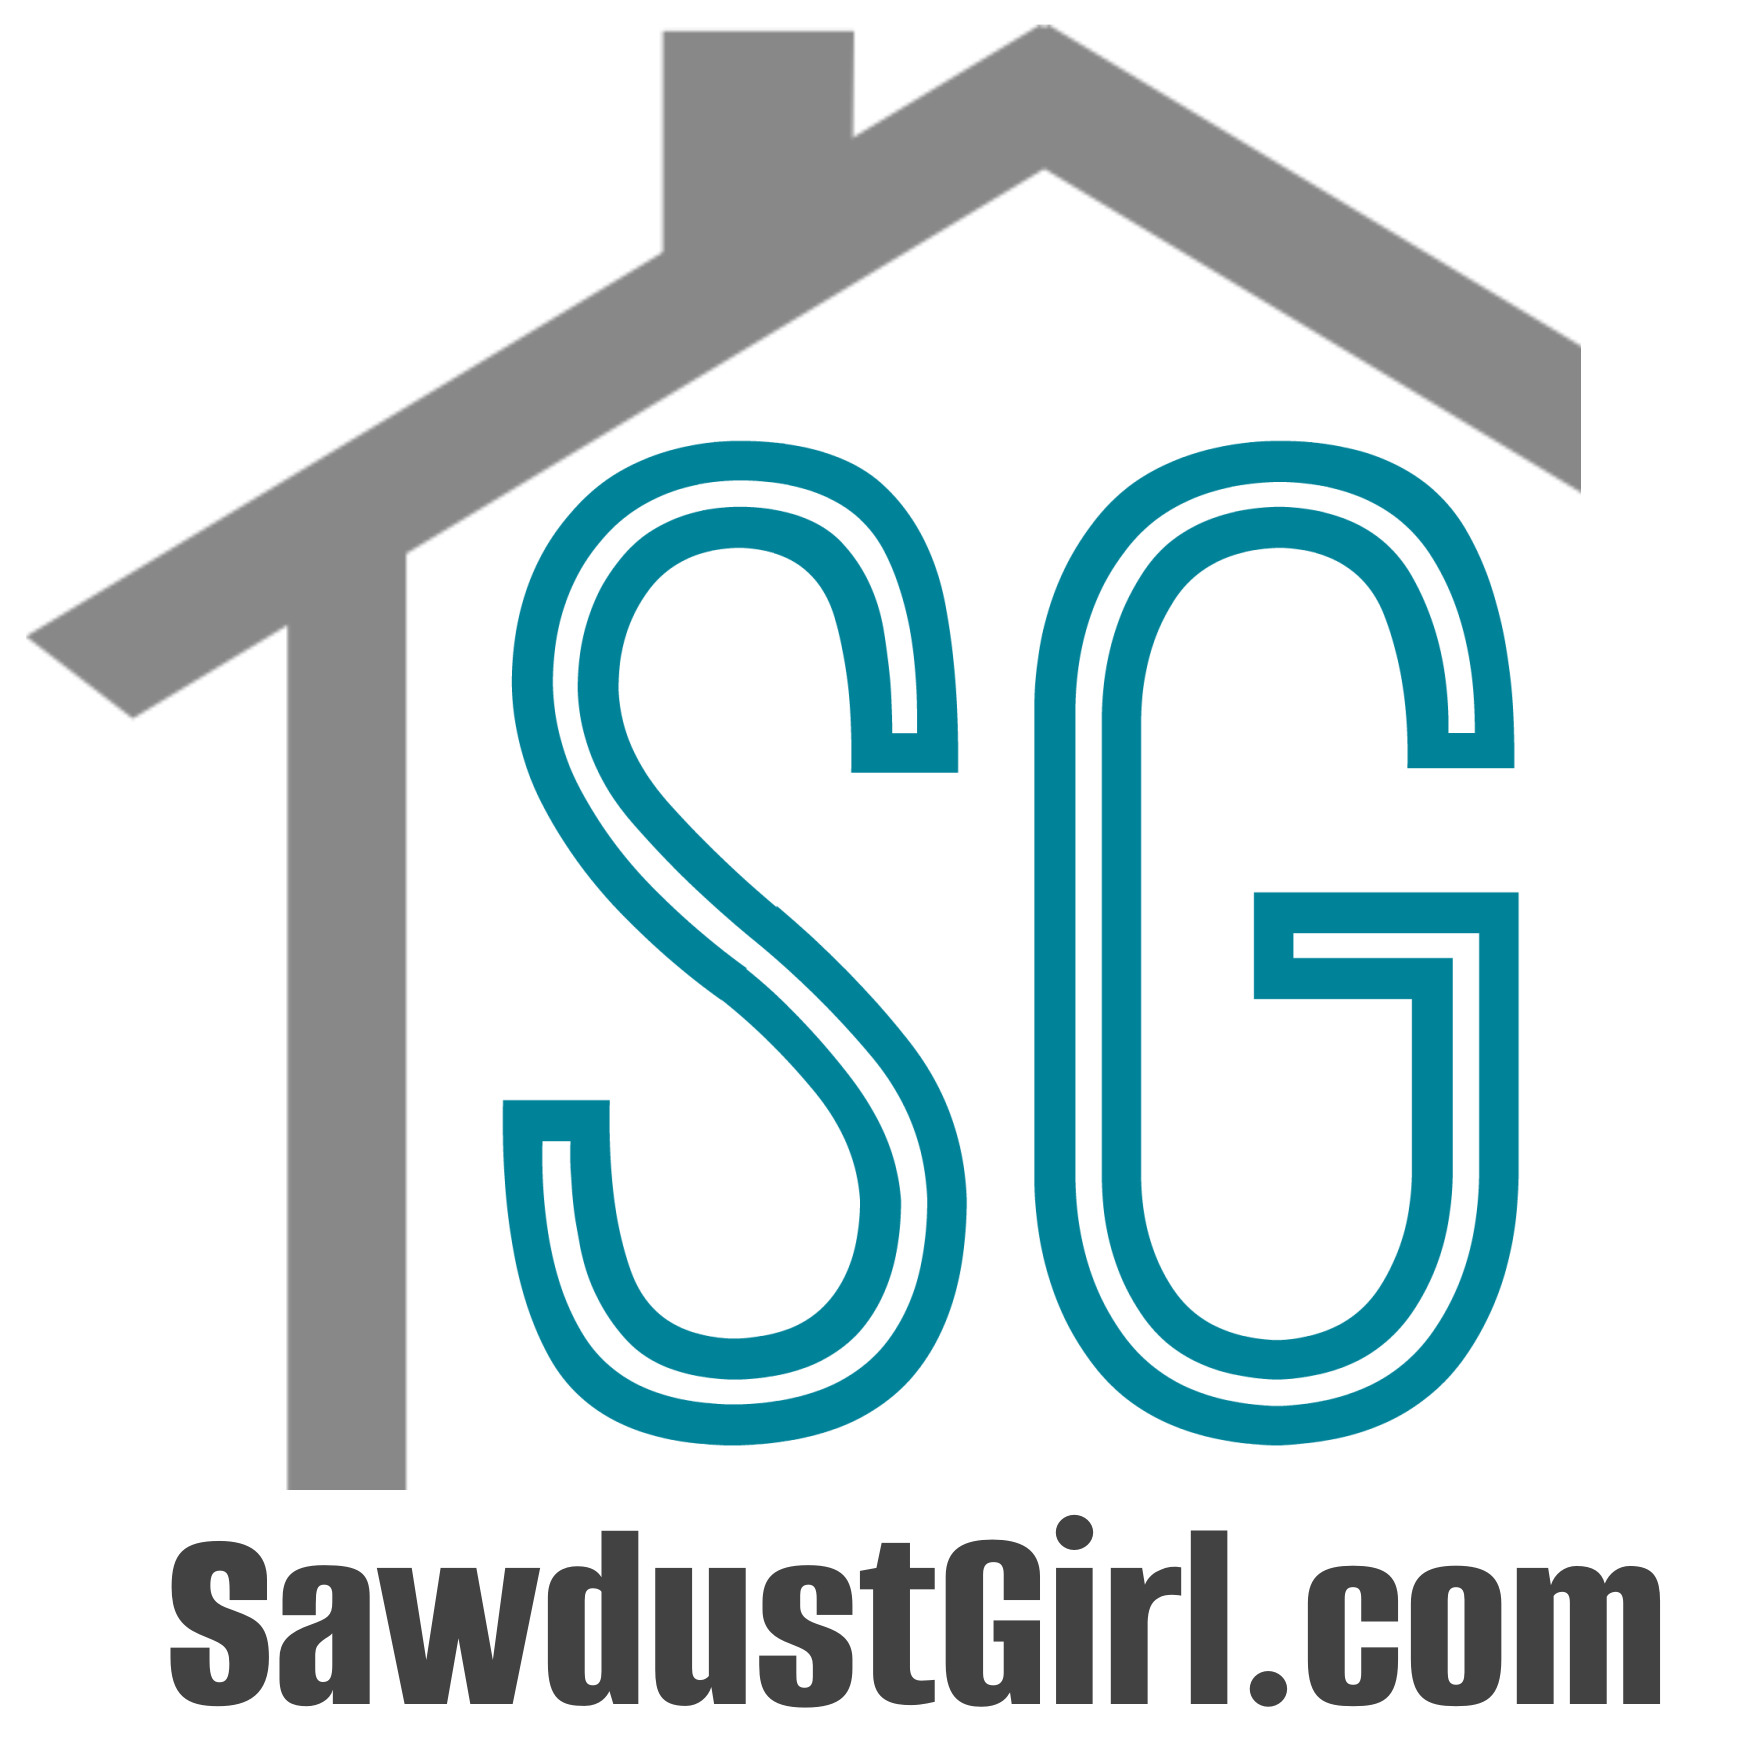 Extension cord safety - Sawdust Girl®